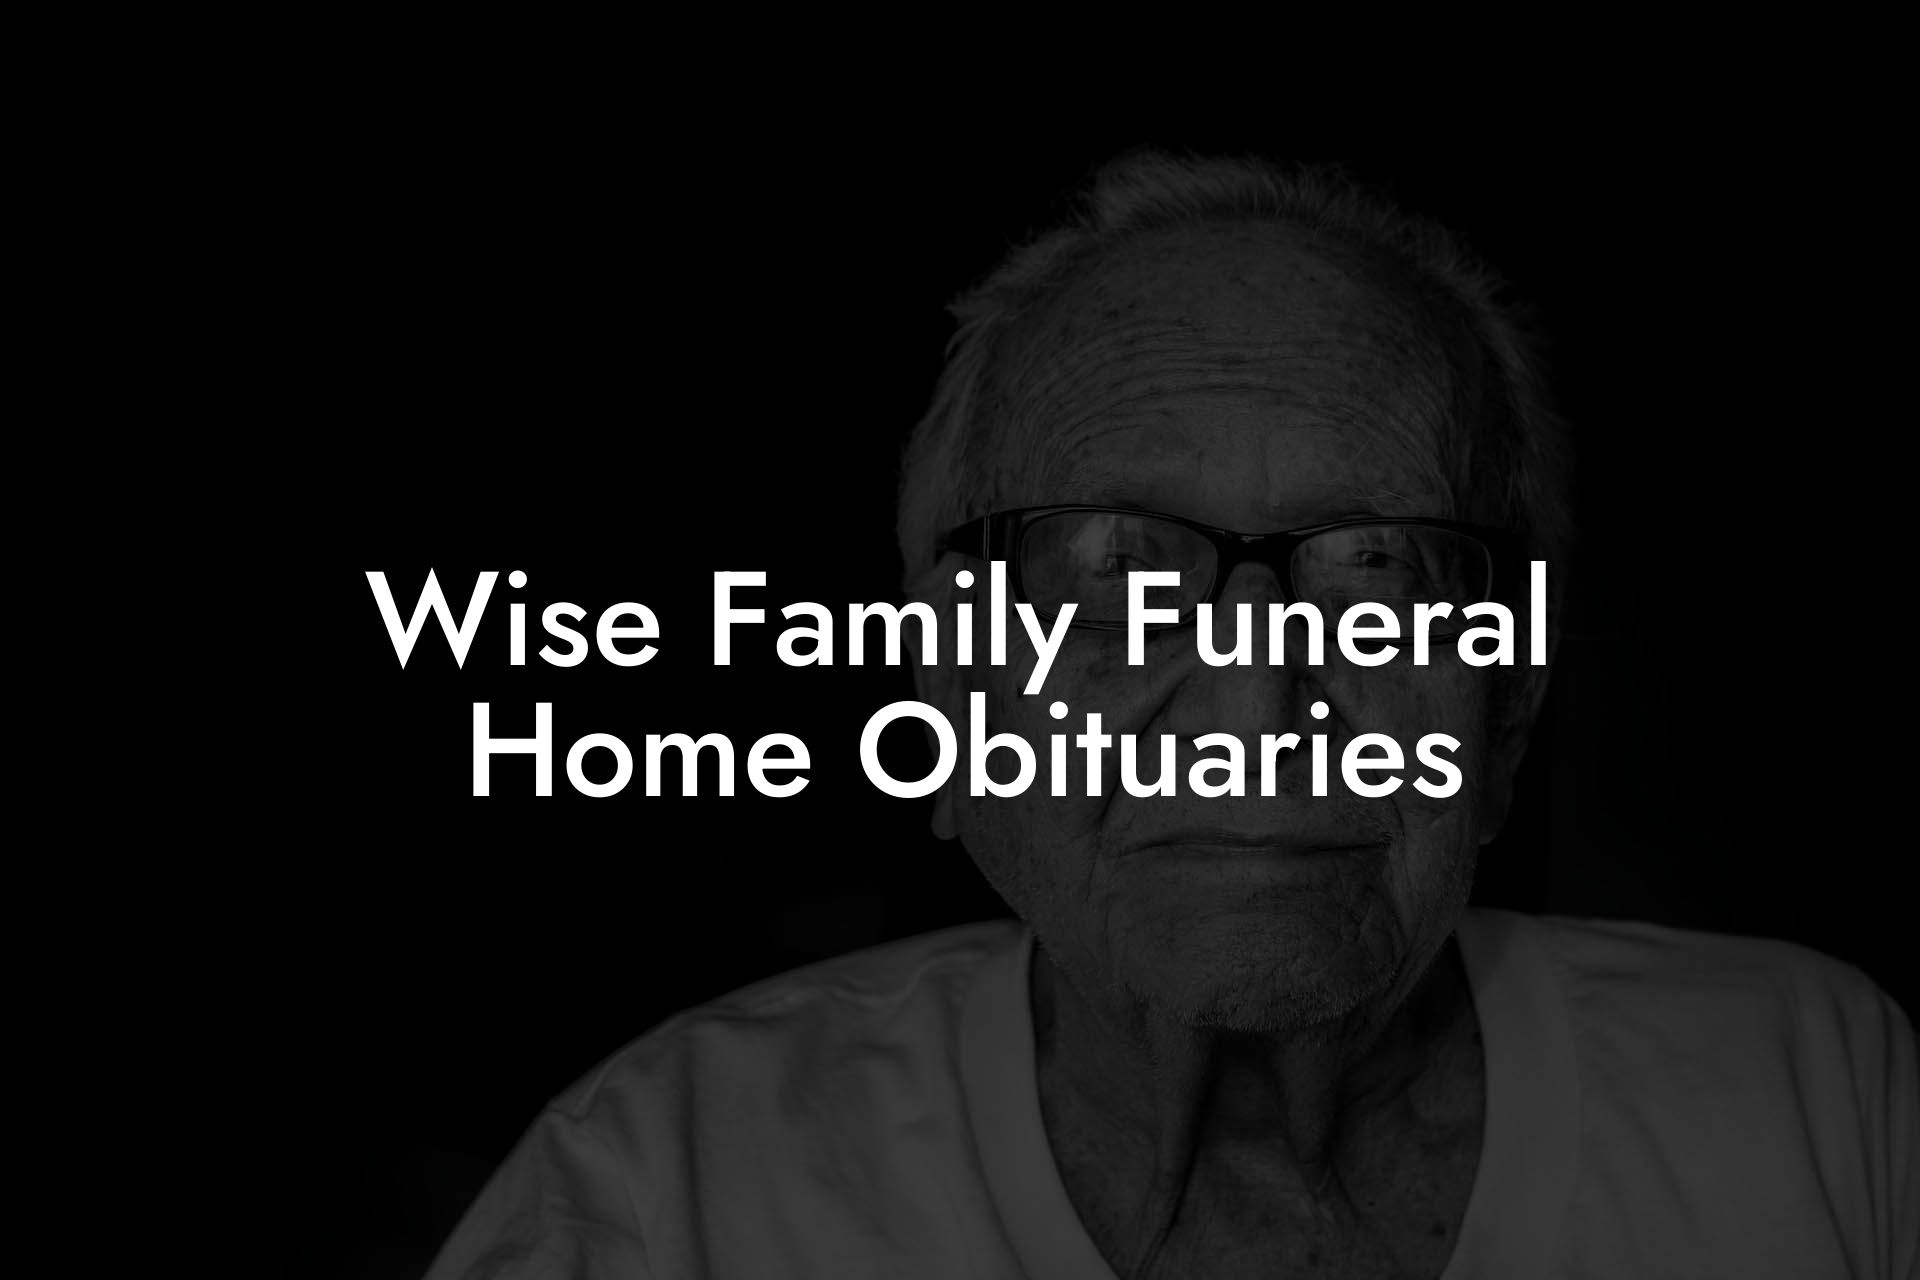 Wise Family Funeral Home Obituaries